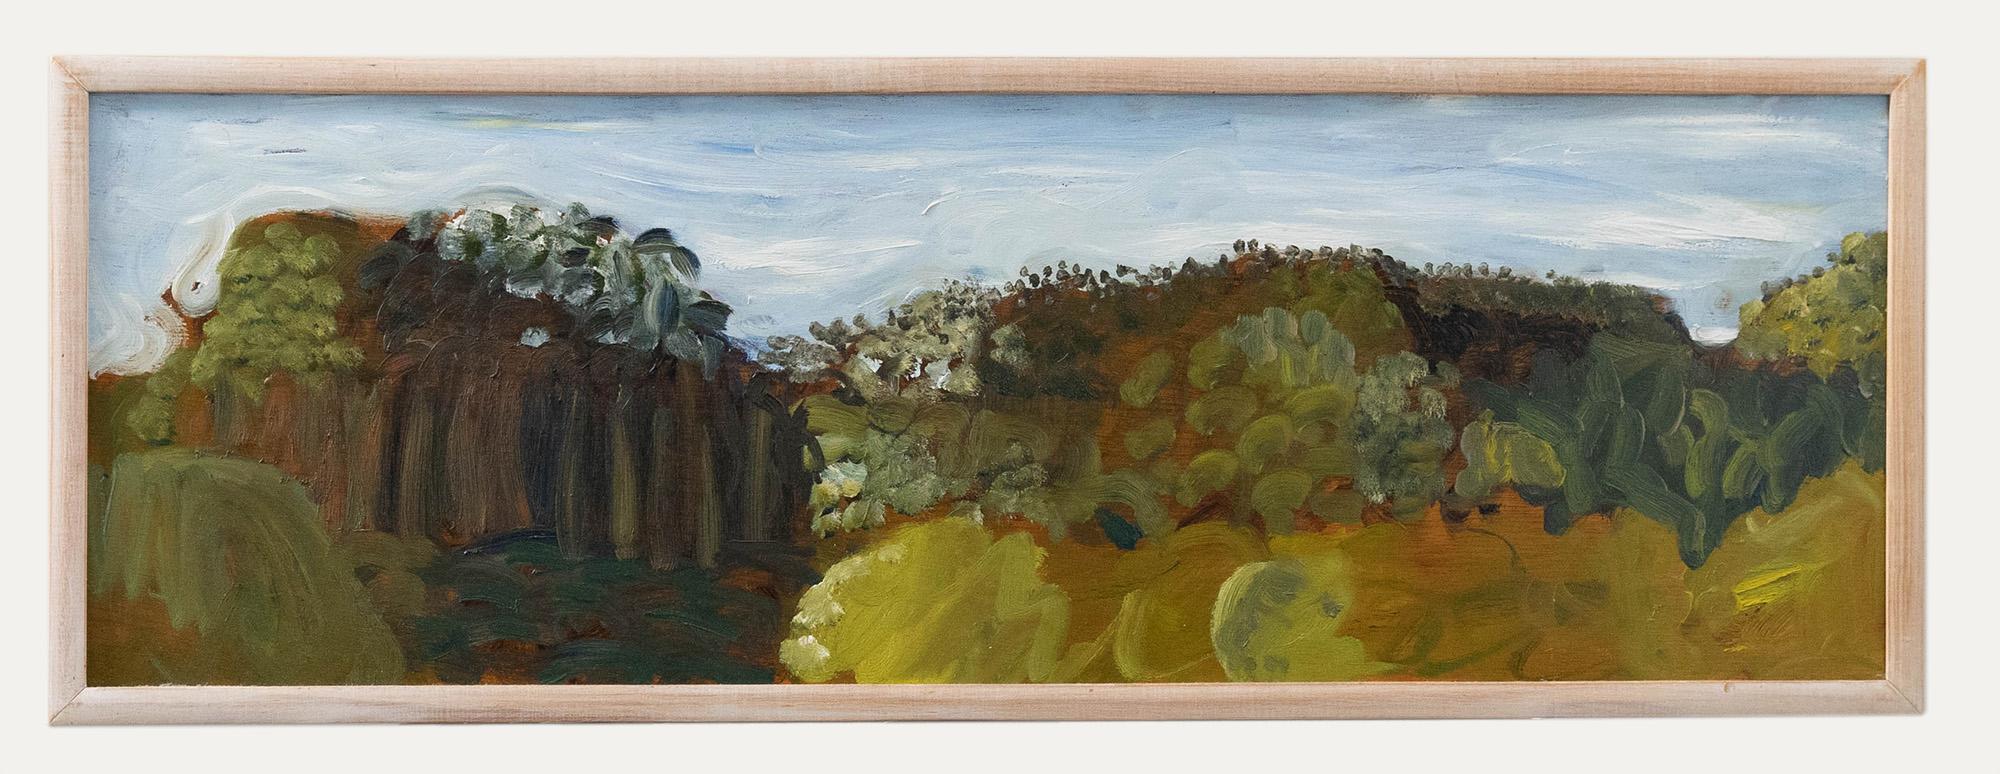 Unknown Landscape Painting - Andrew Hmelnitsky - Framed Contemporary Oil, Forest near Chillingham